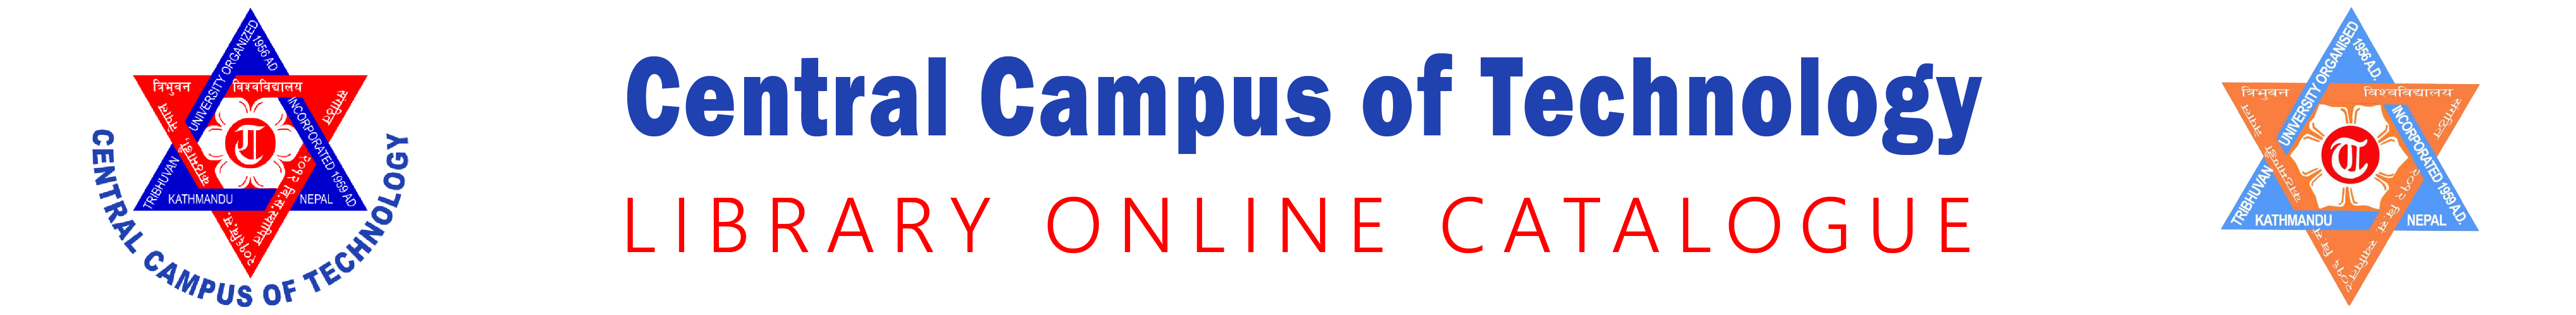 Central Campus of Technology